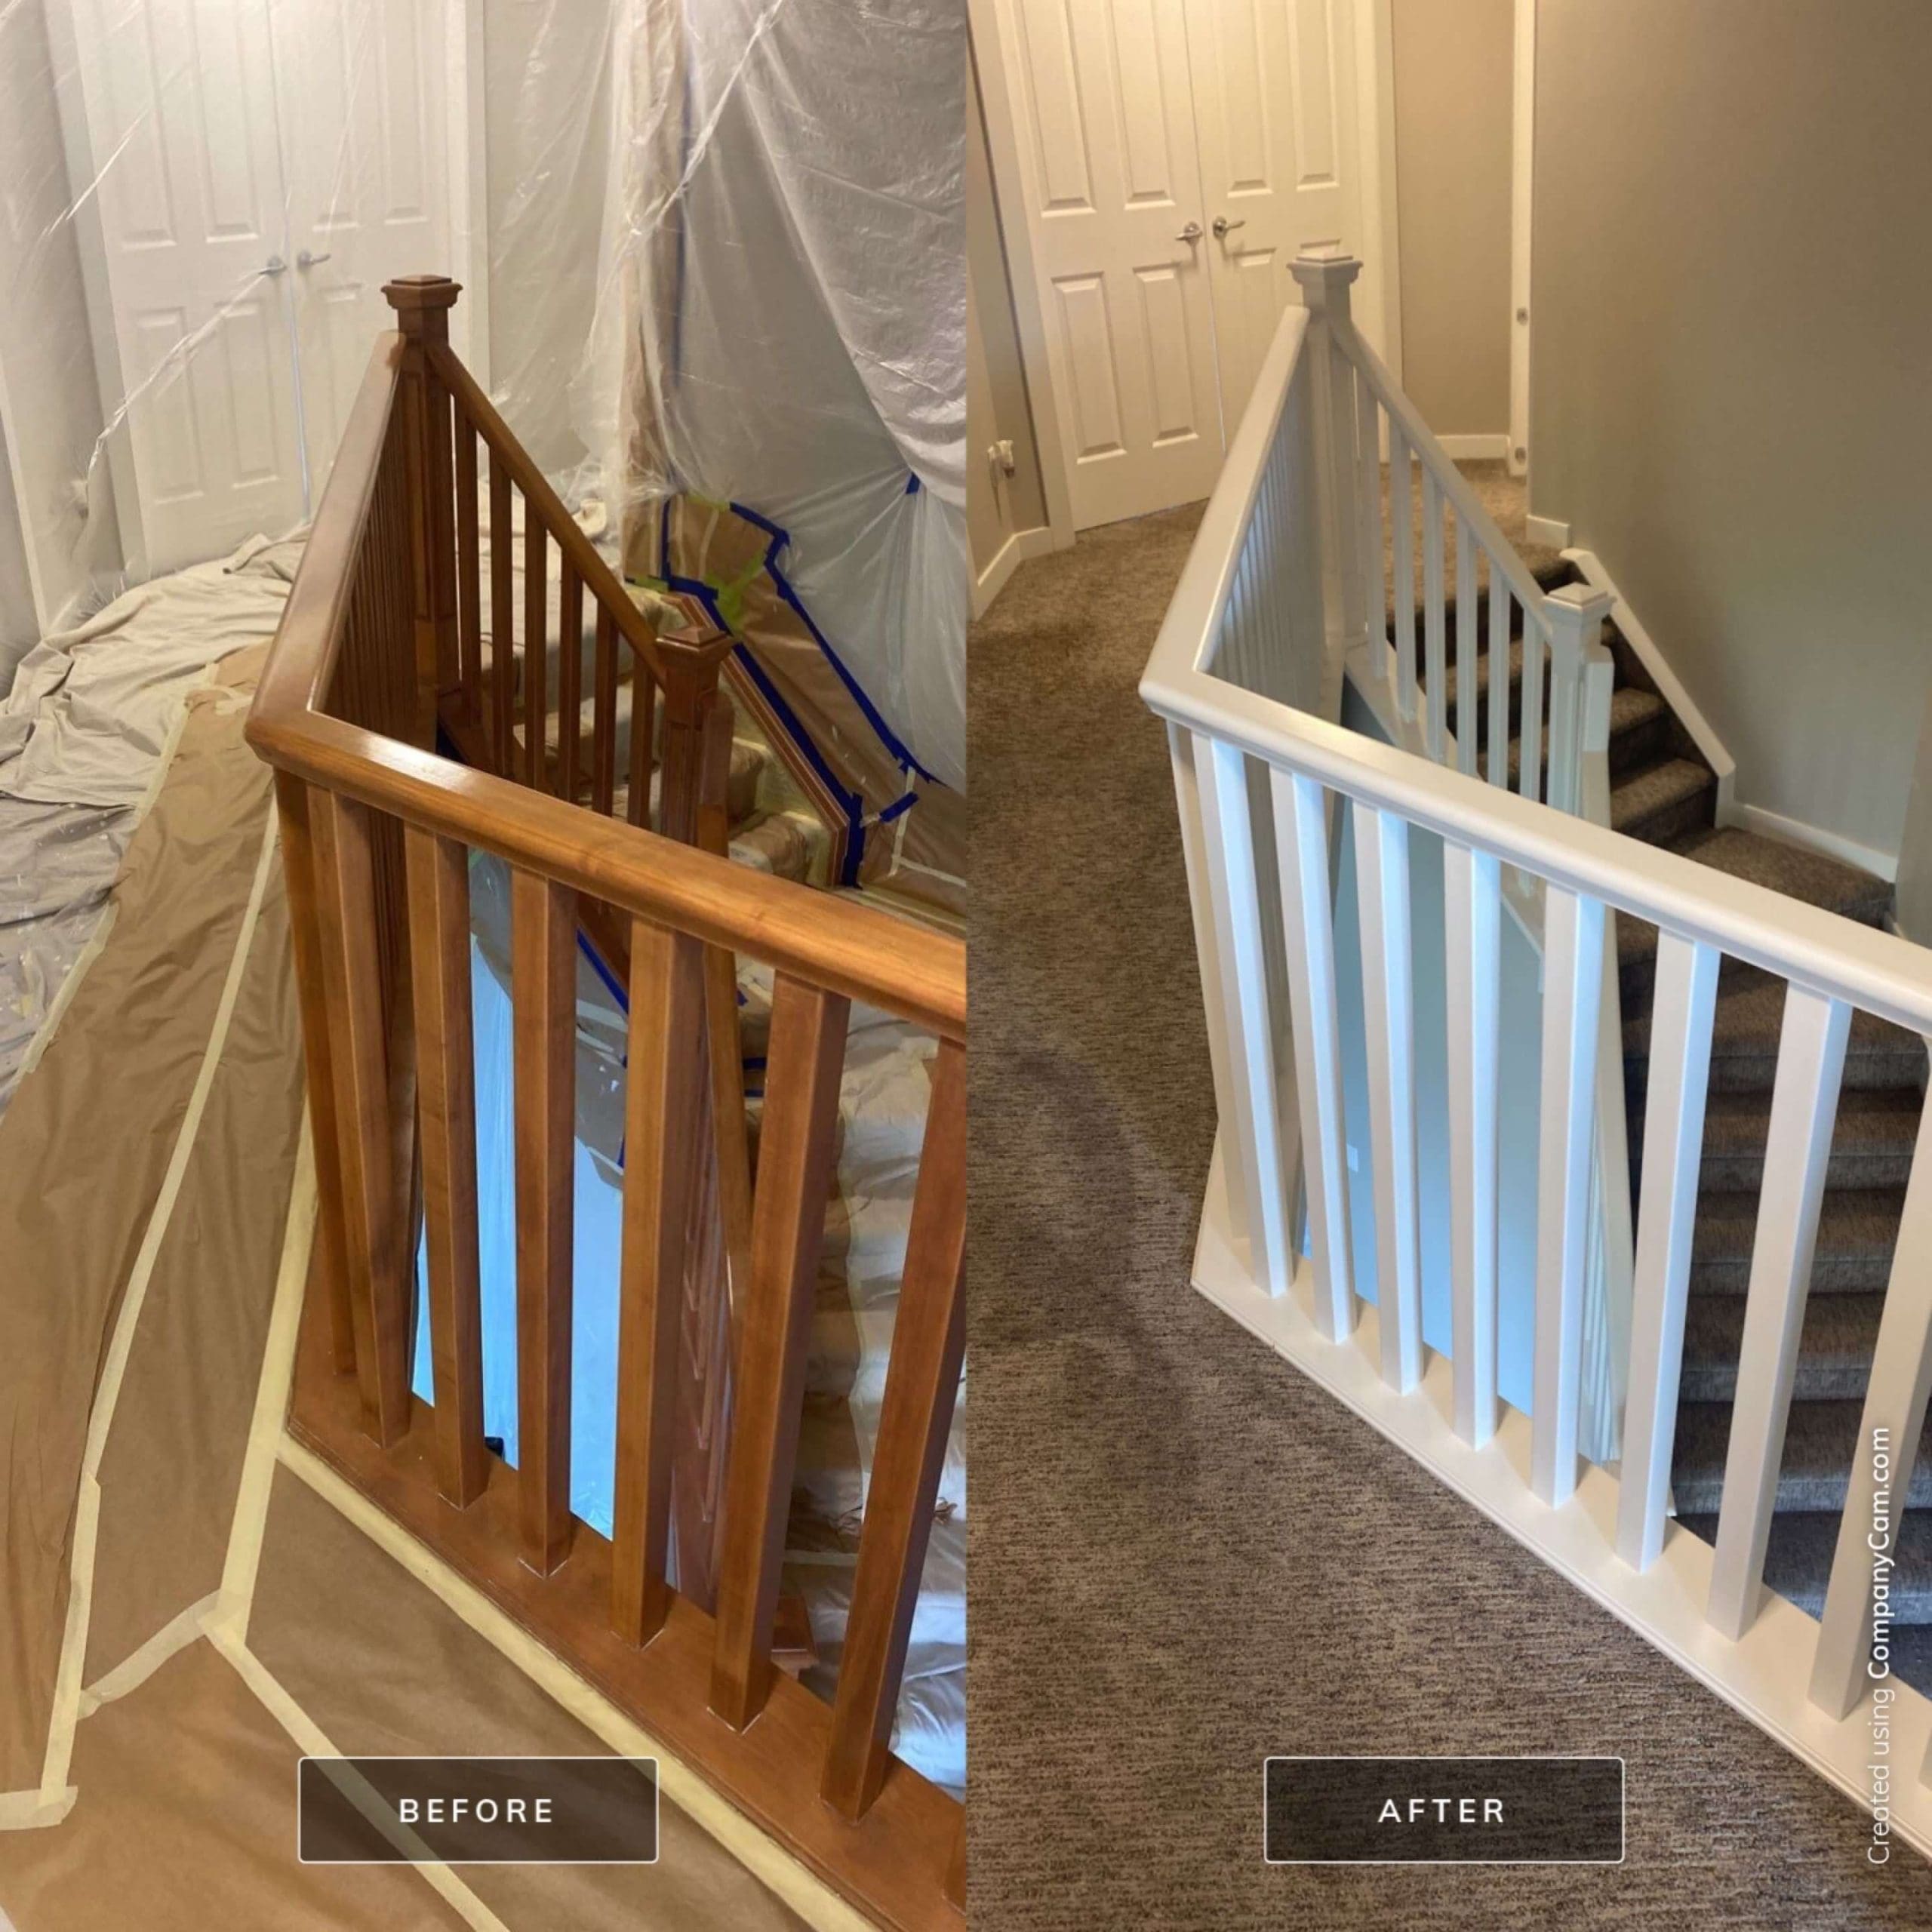 Banister Rail before and after painting